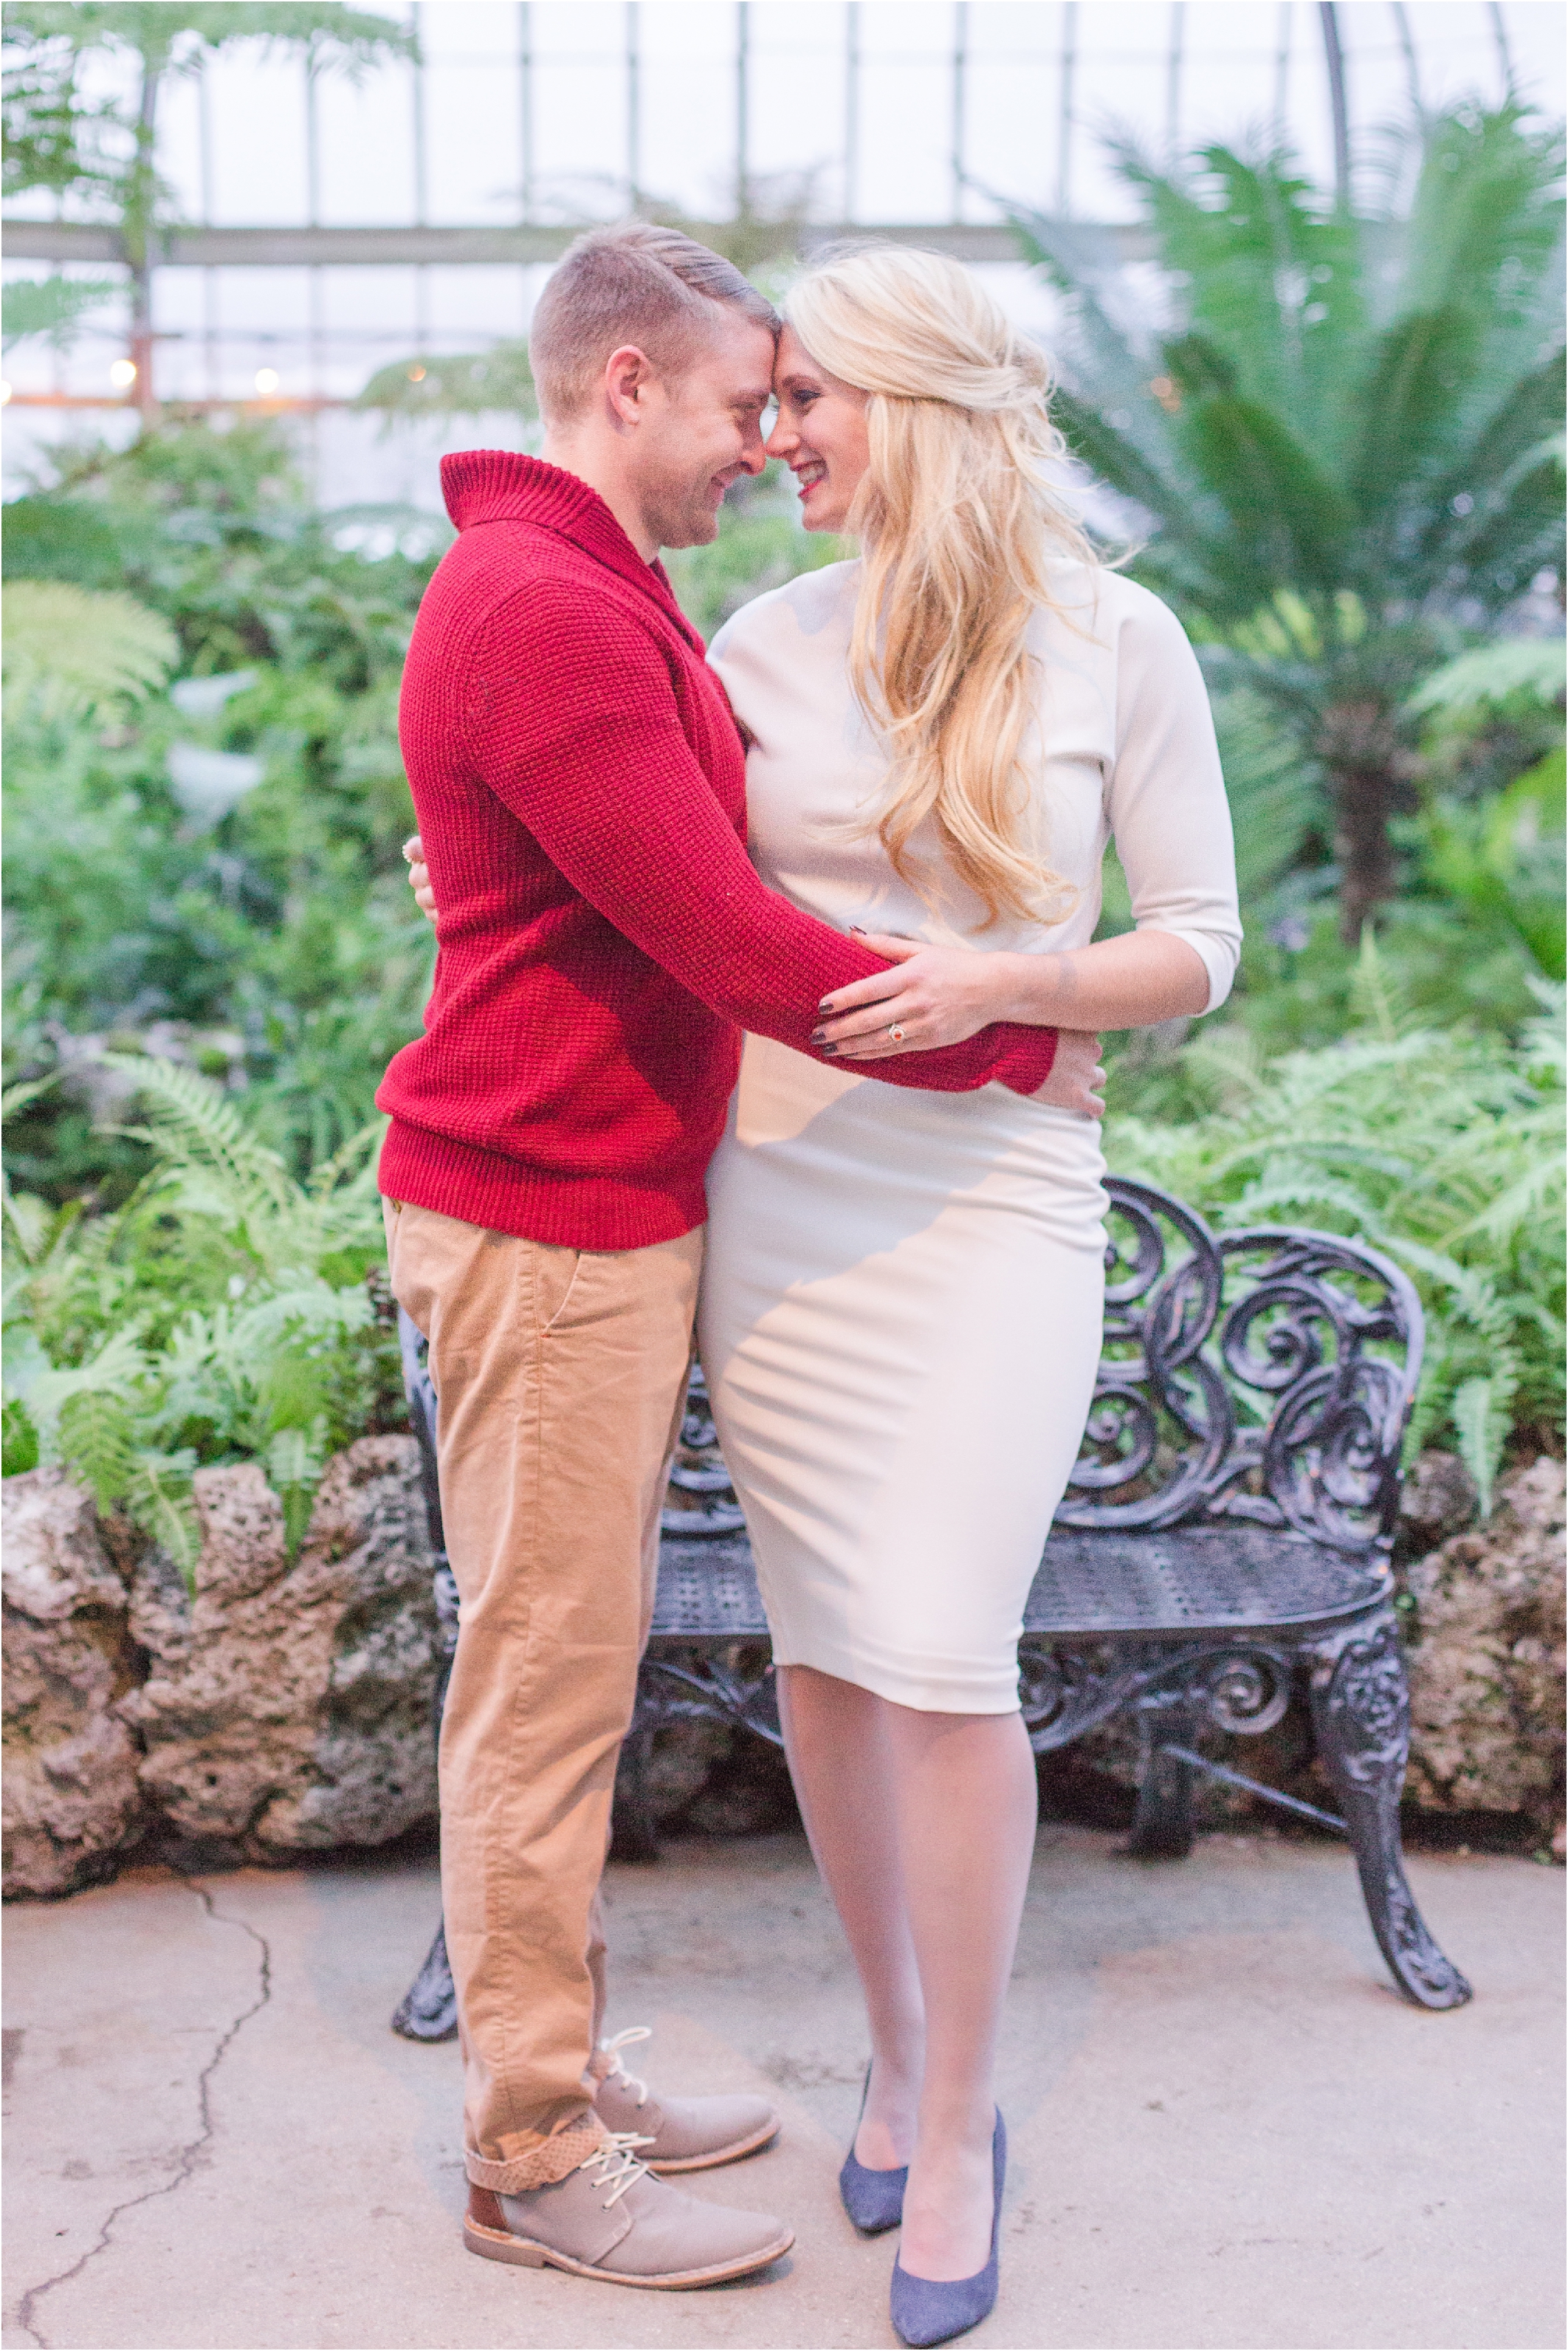 elegant-classic-belle-isle-conservatory-engagement-photos-in-detroit-mi-by-courtney-carolyn-photography_0026.jpg